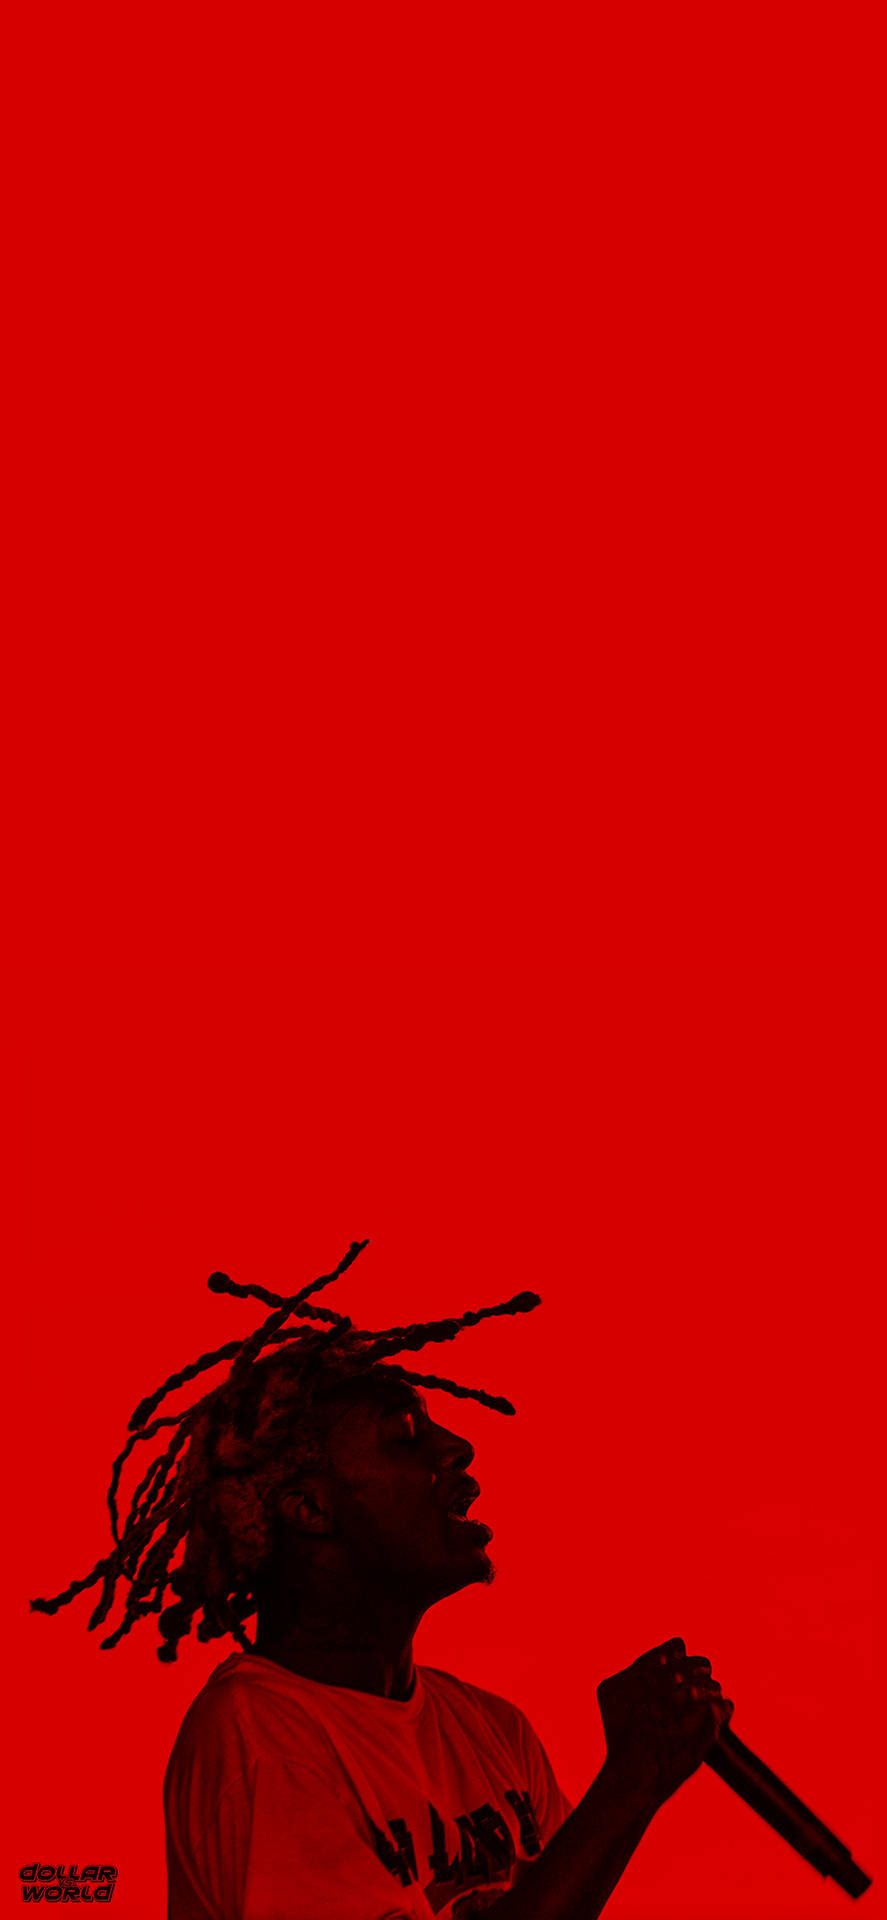 Whole Lotta Red Carti Iphone Wallpaper